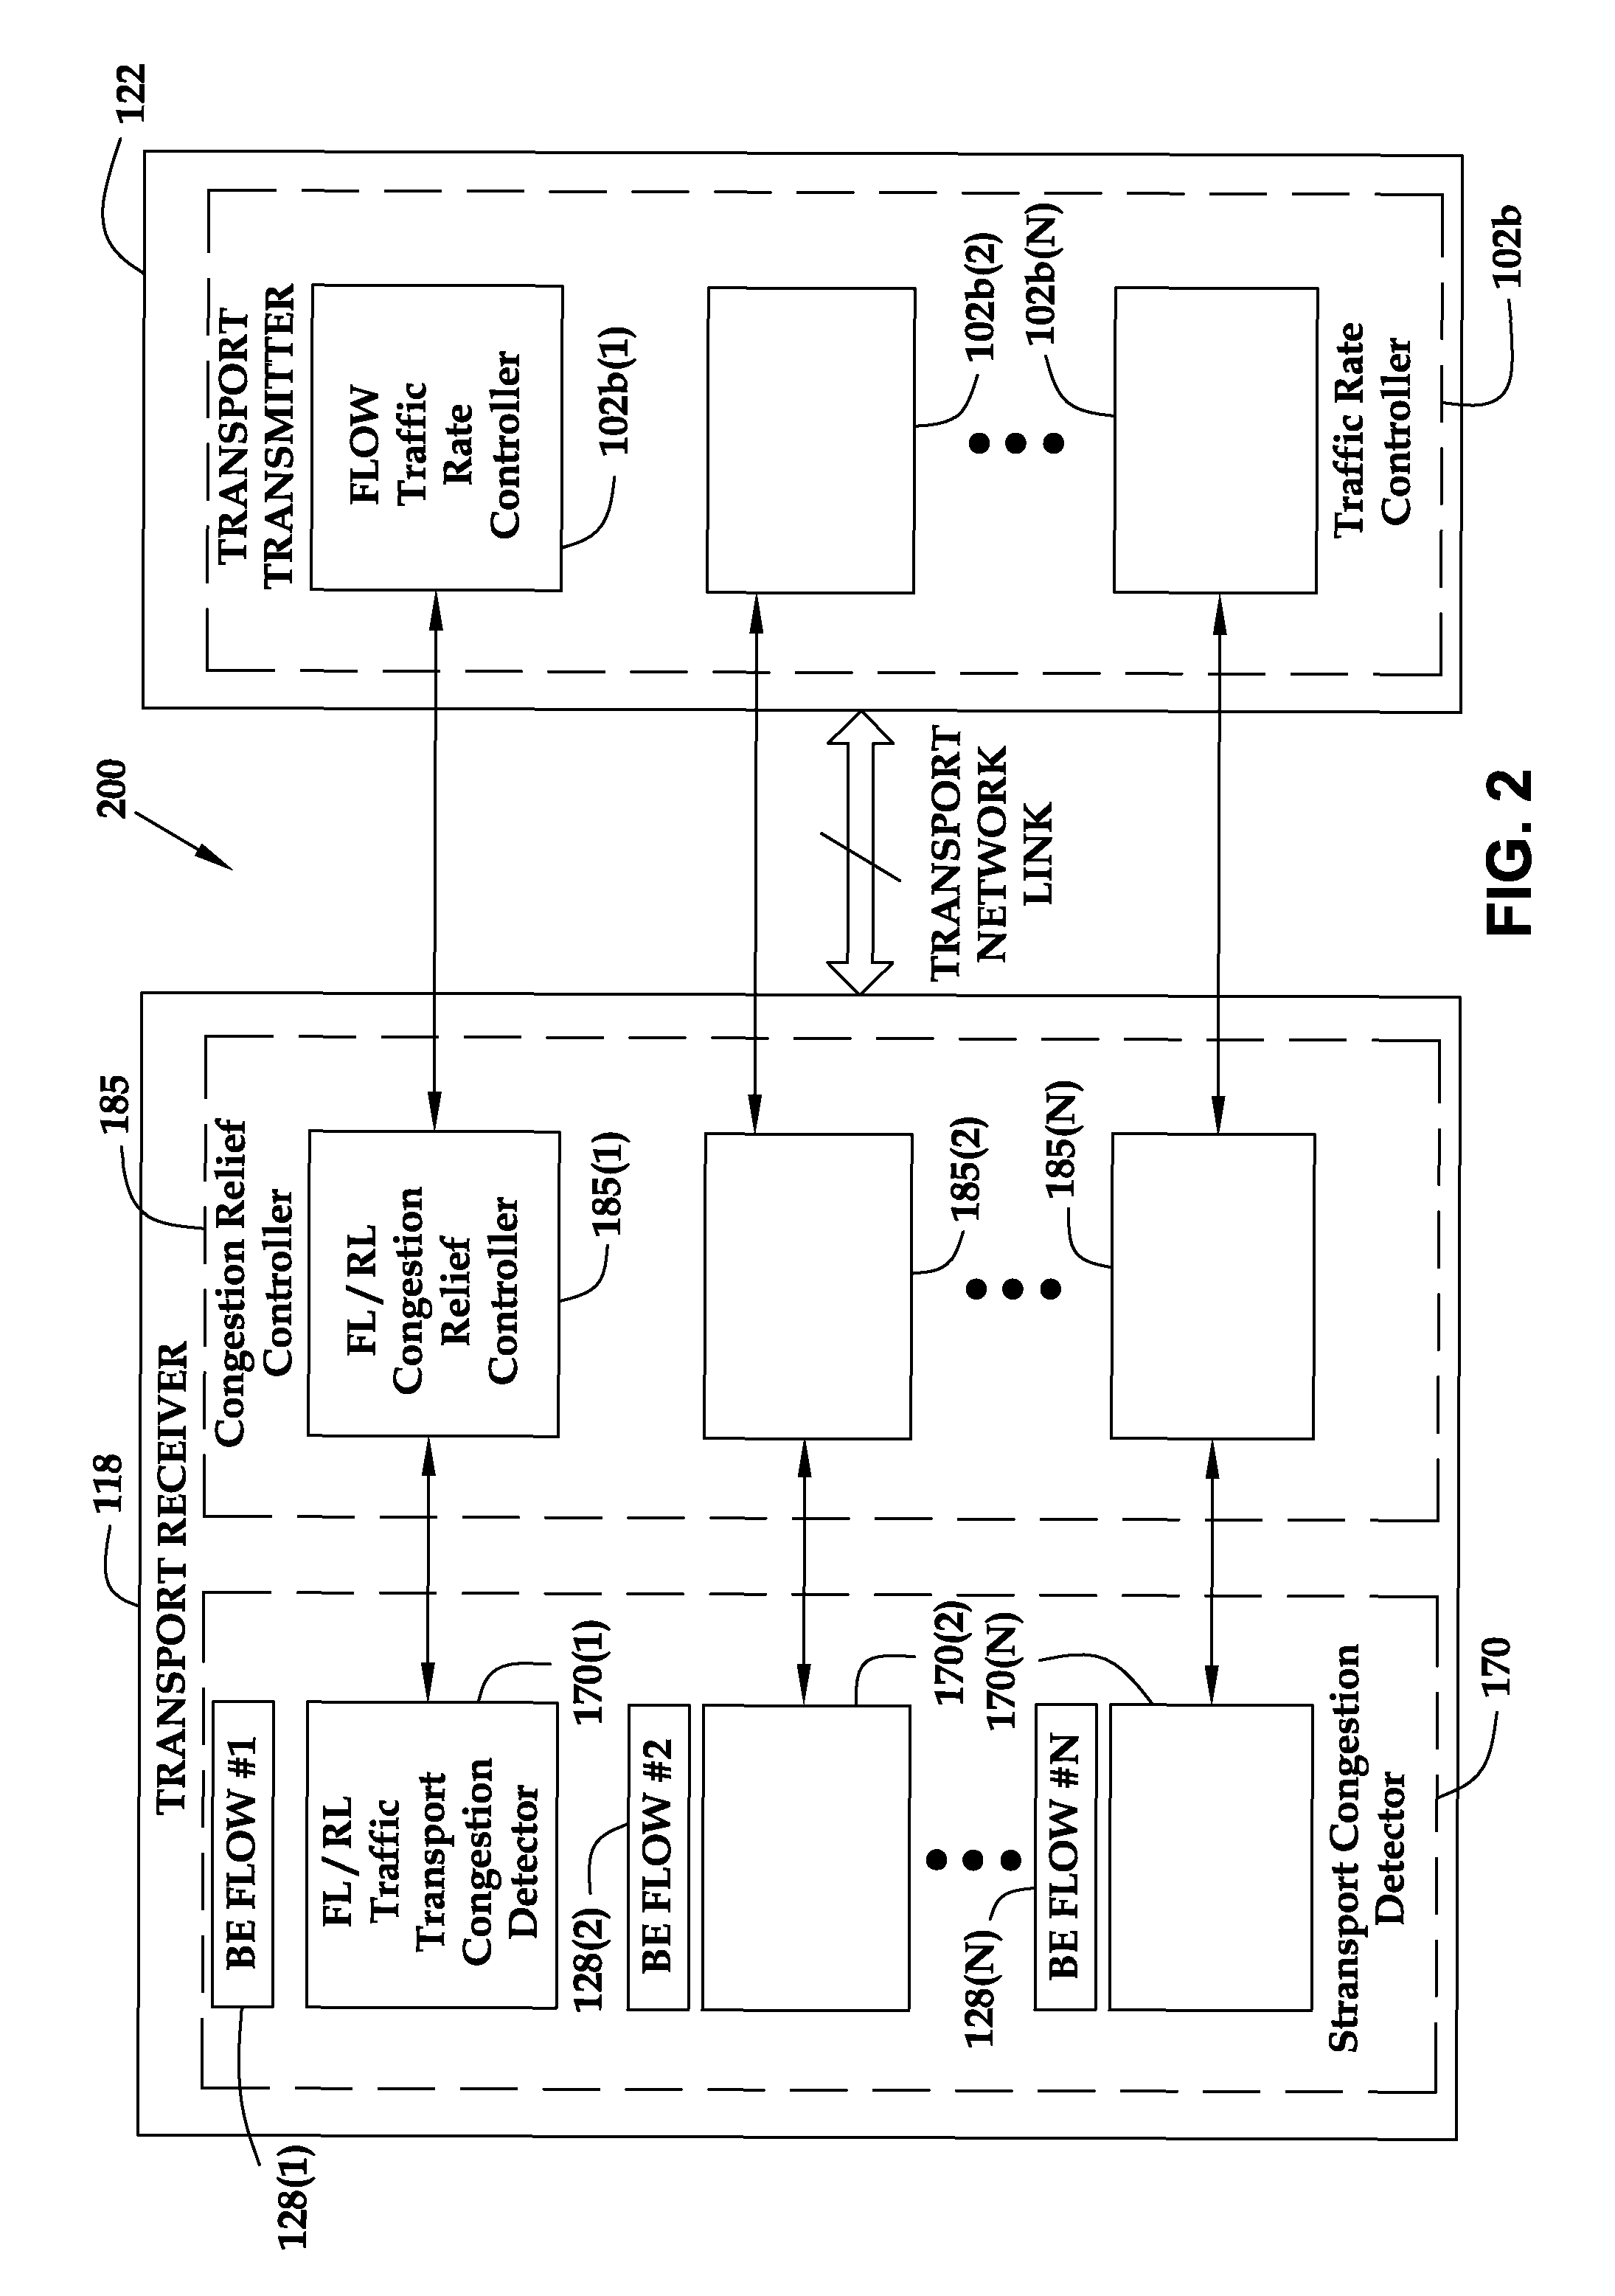 Reducing packet loss for a packet data service during congestion in a transport network